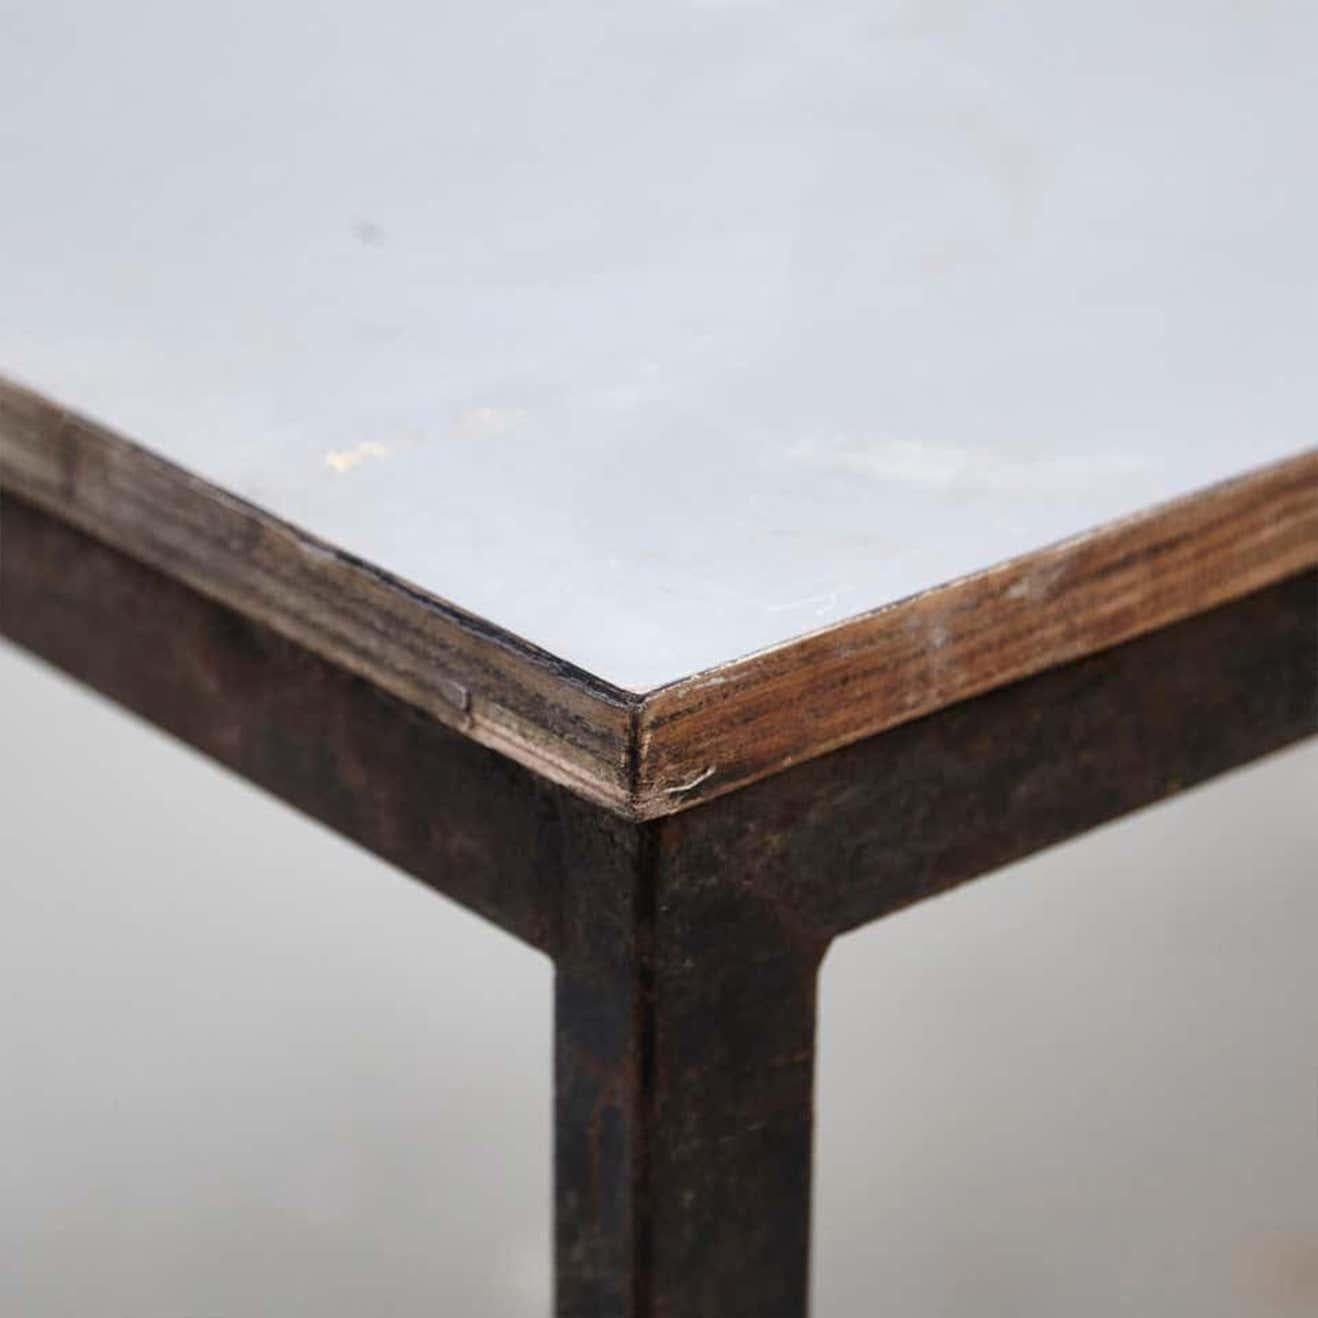 Mid-20th Century Charlotte Perriand, Mid-Century Modern, Wood Metal Cansado Table, circa 1950 For Sale